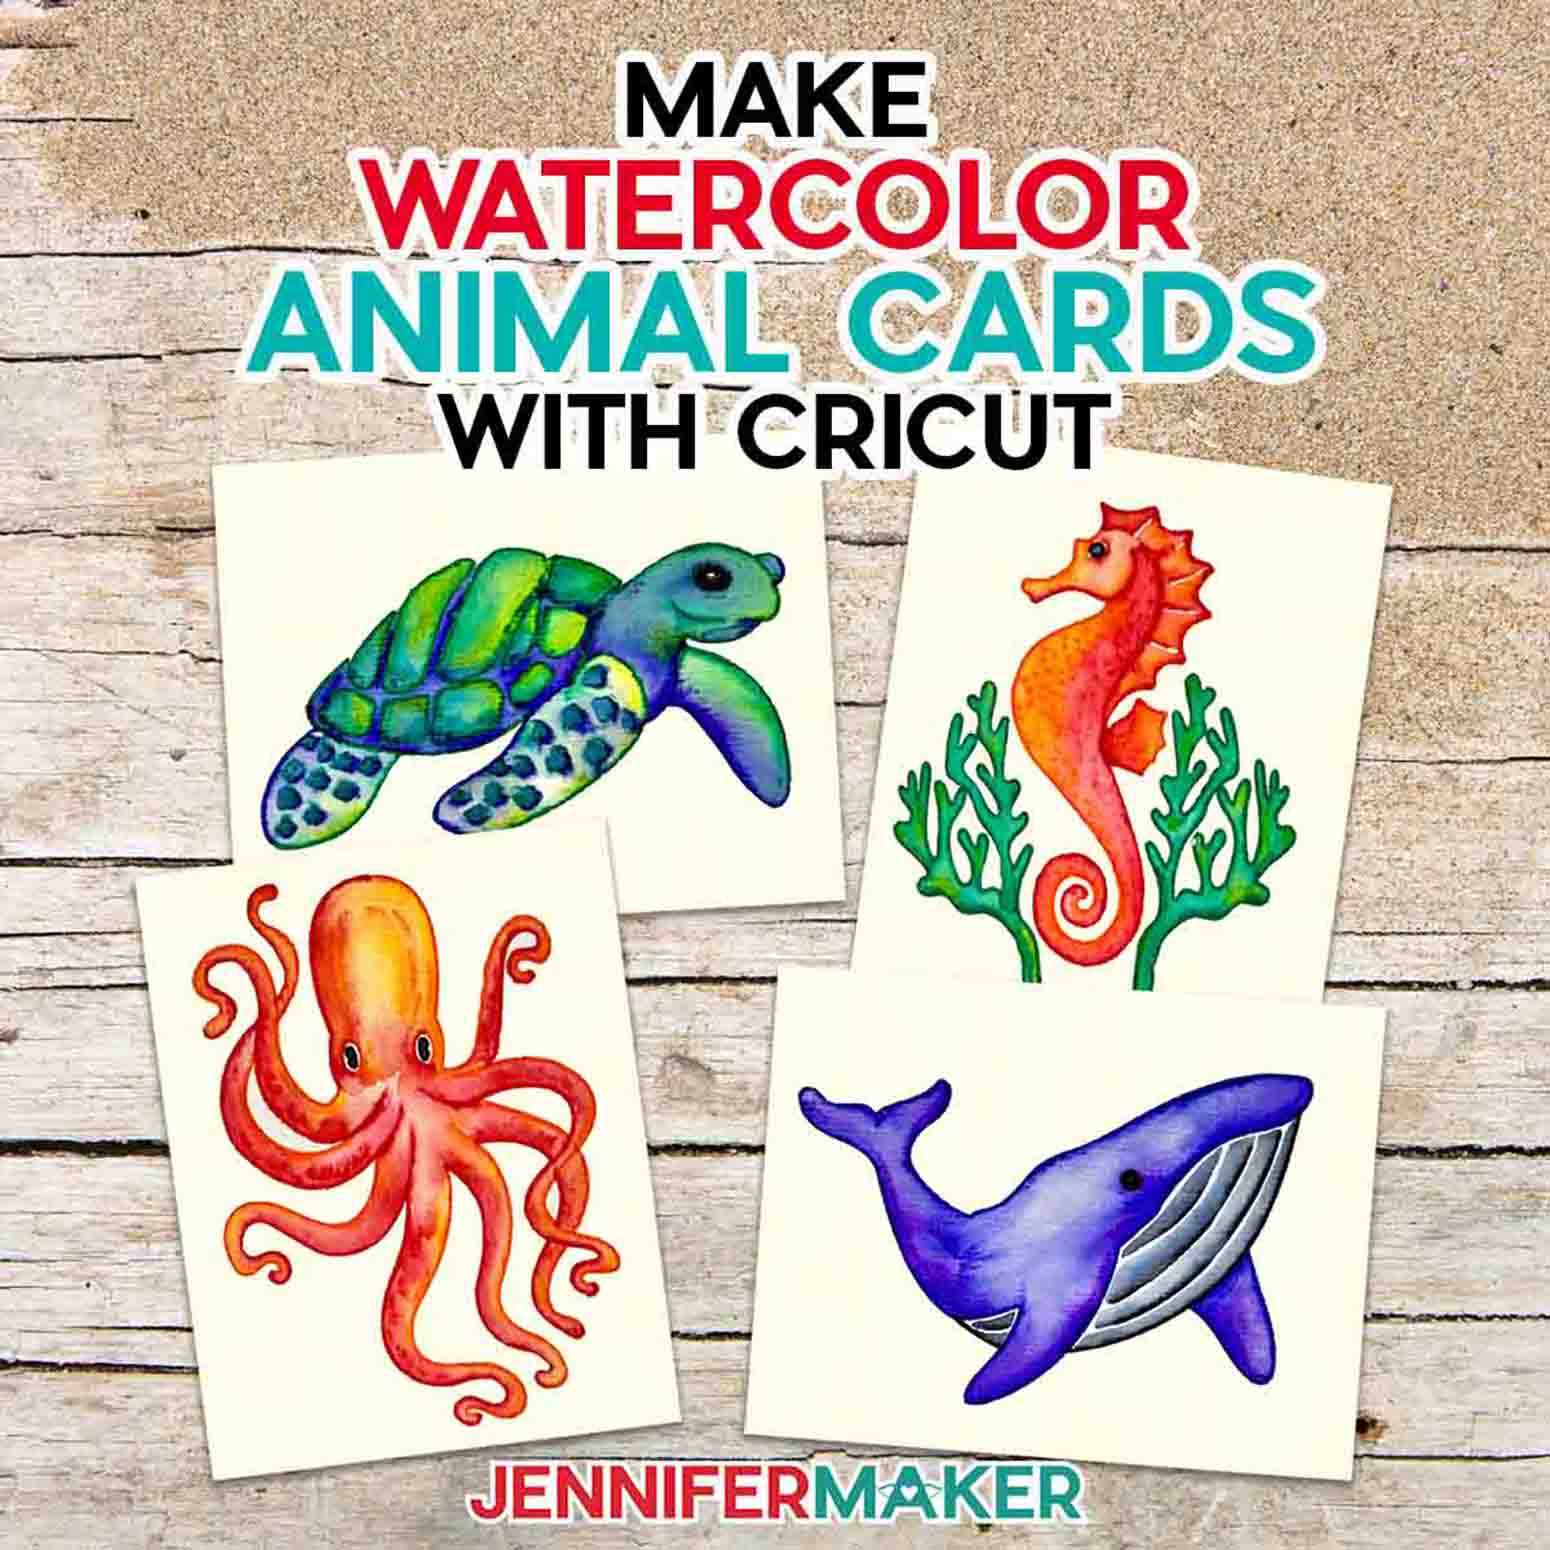 DIY watercolor cards featuring a sea turtle, seahorse, octopus, and whale made using Cricut watercolor markers and a JenniferMaker tutorial.